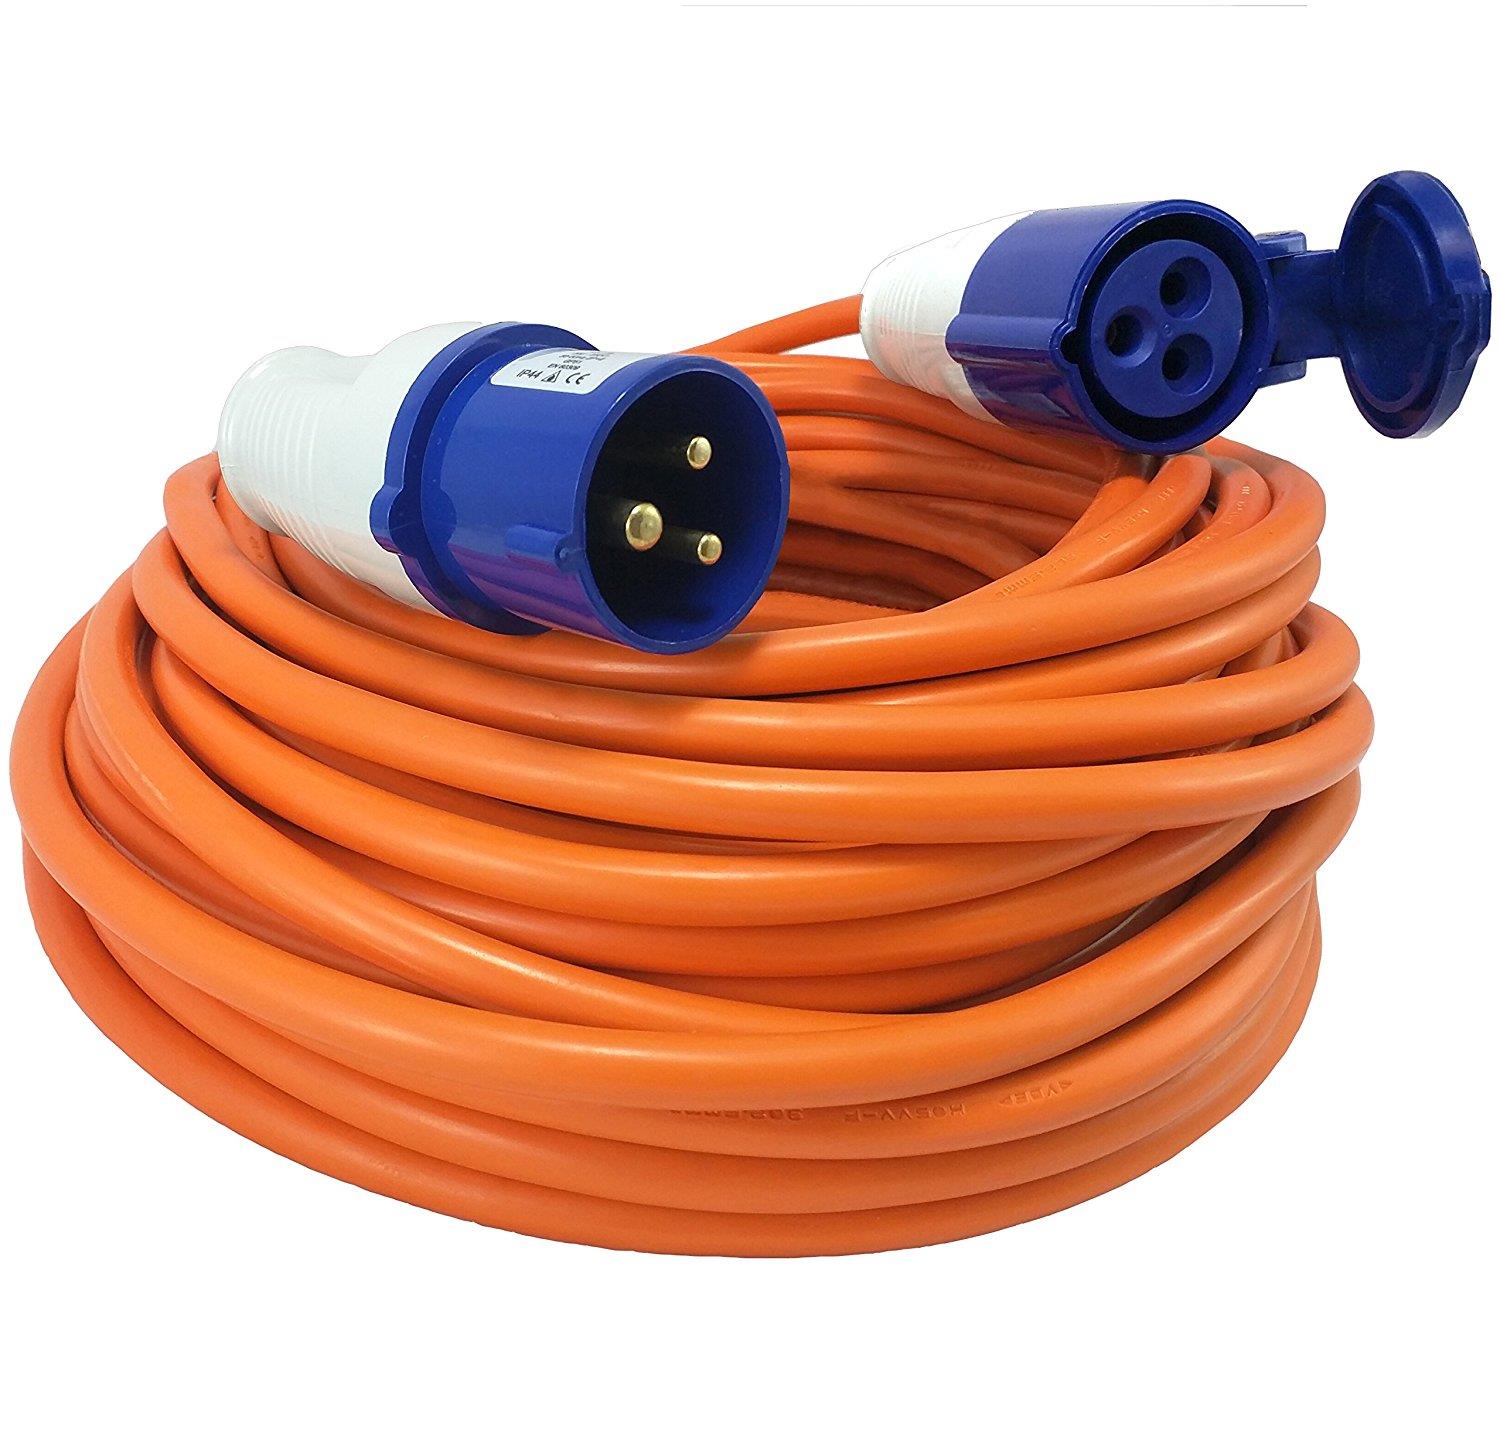 Blue Seal BLACK CURLY POWER MAINS FLEX CABLE LEAD c/w PLUG13 AMP 4 METERS 3 CORE 1.5MM 